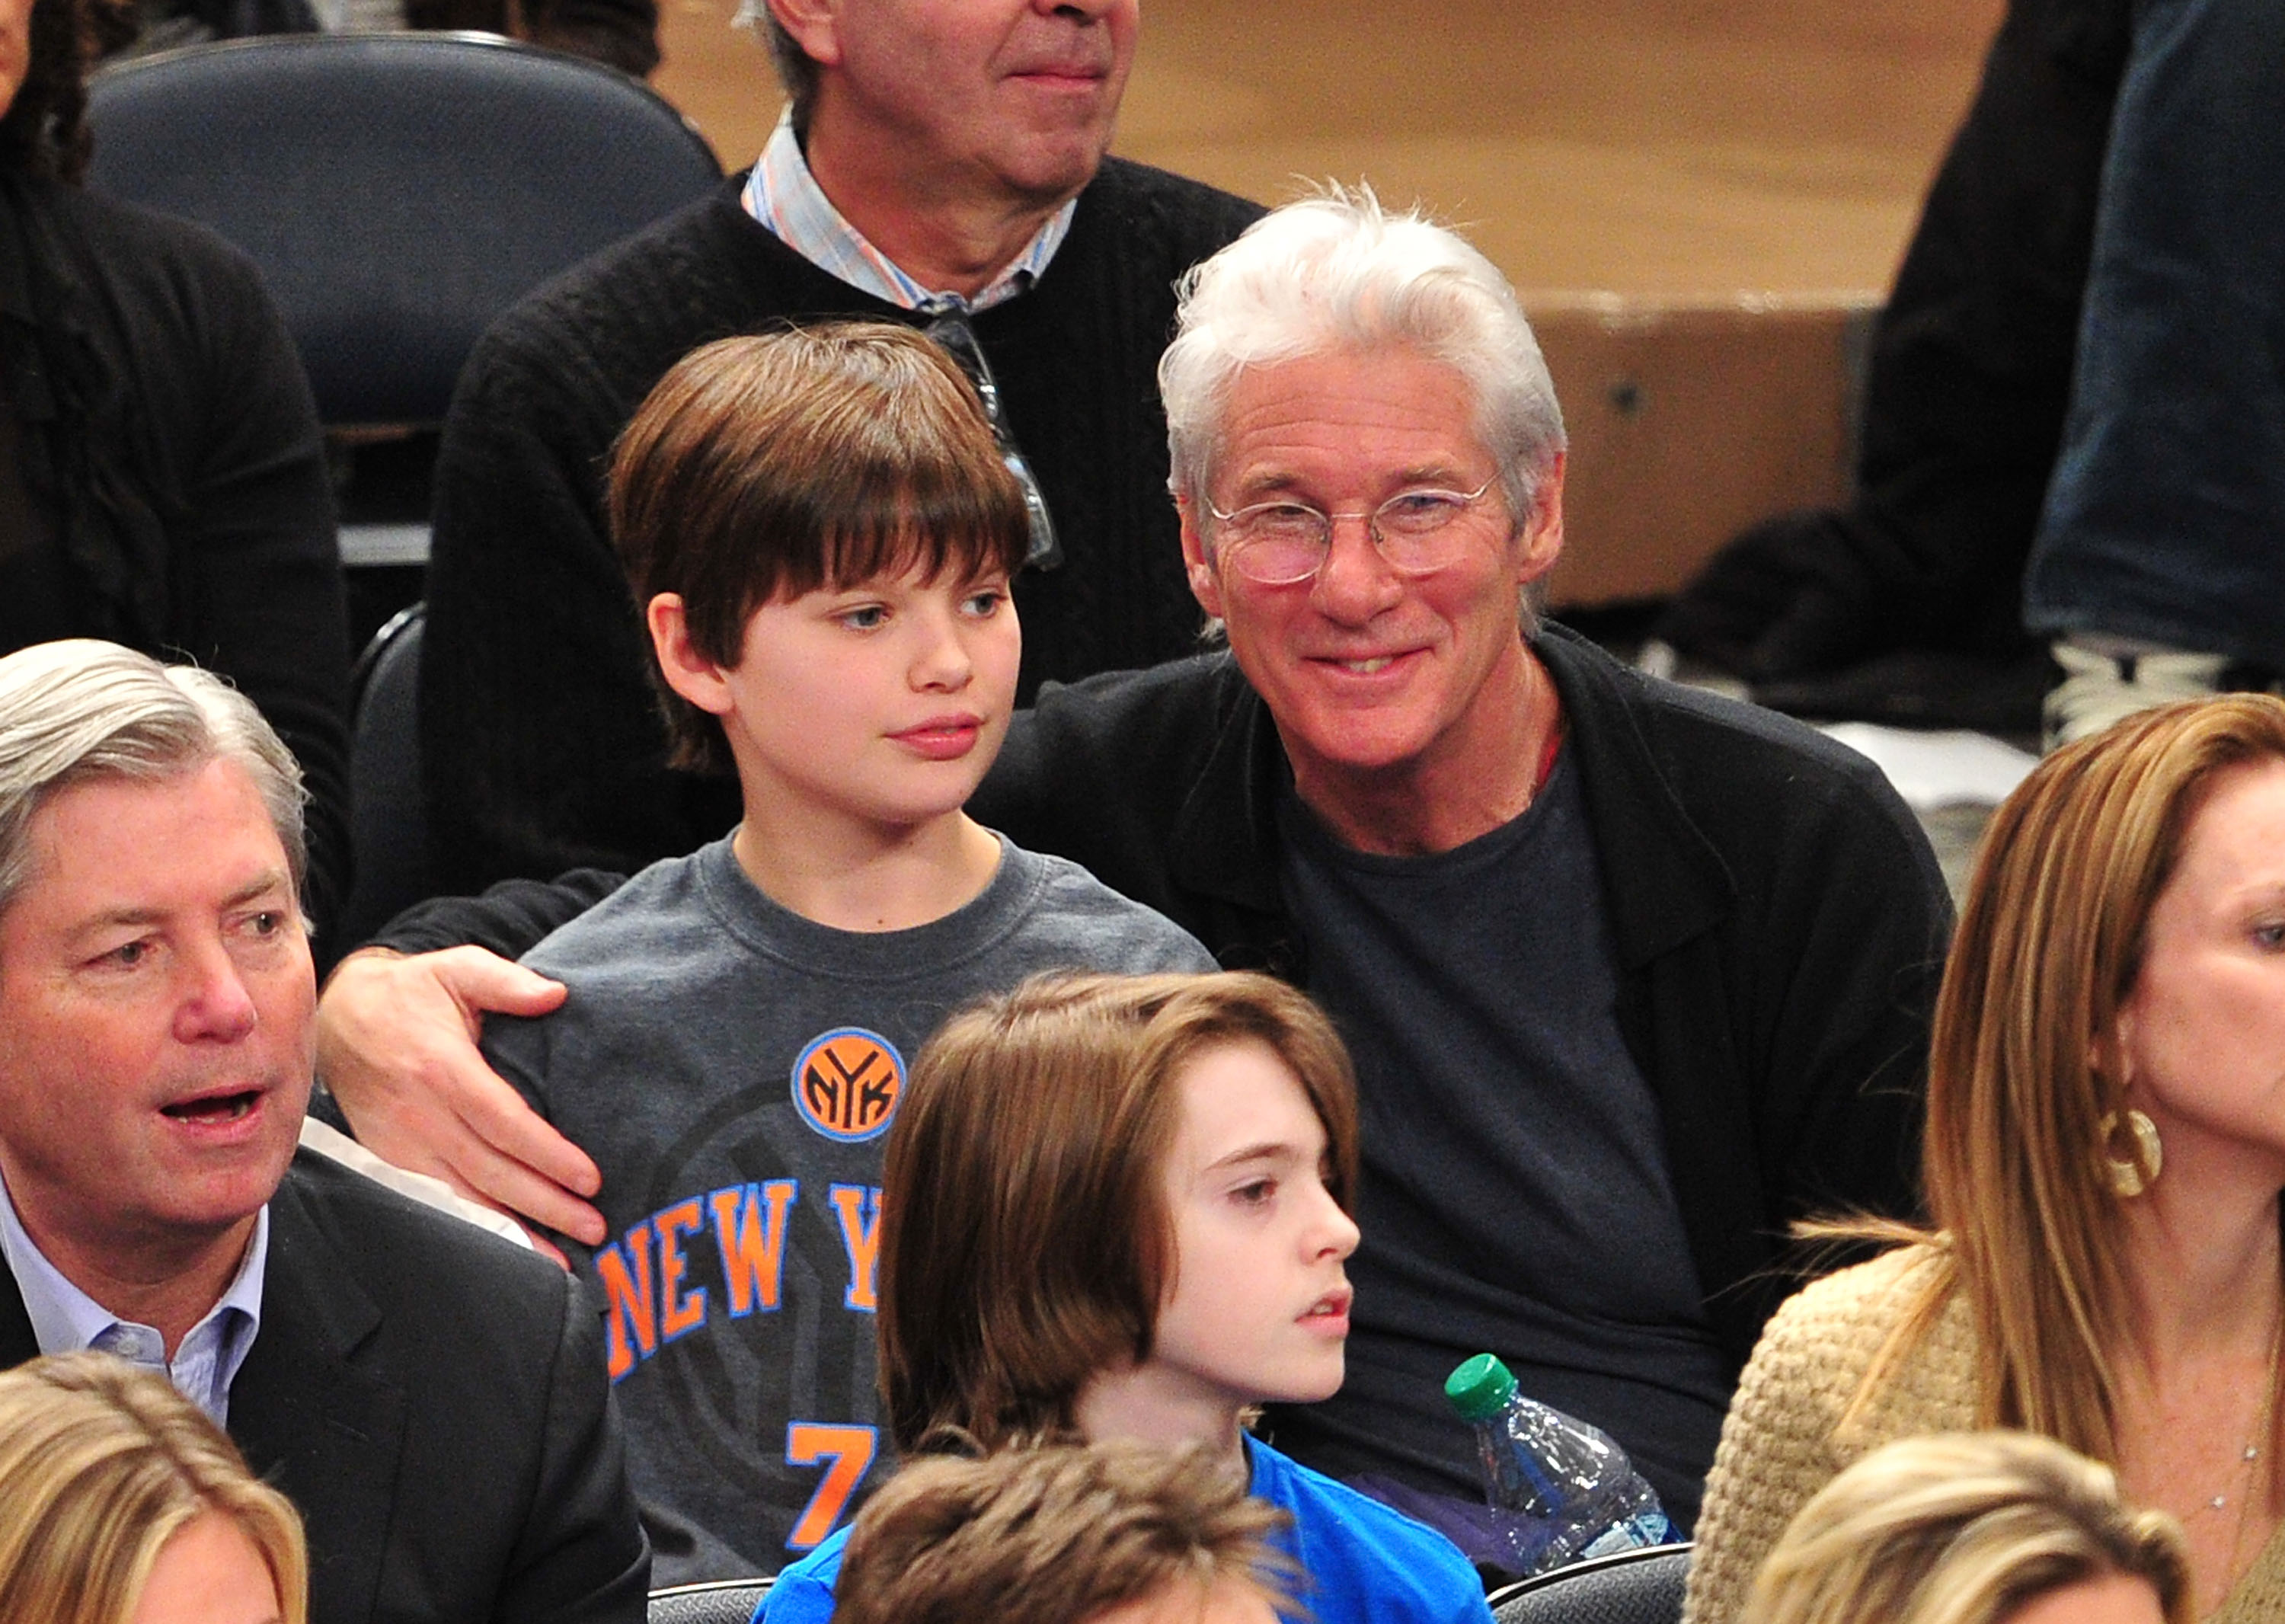 Homer James Jigme Gere and Richard Gere at a Chicago Bulls vs New York Knicks in New York City on February 2, 2012 | Source: Getty Images